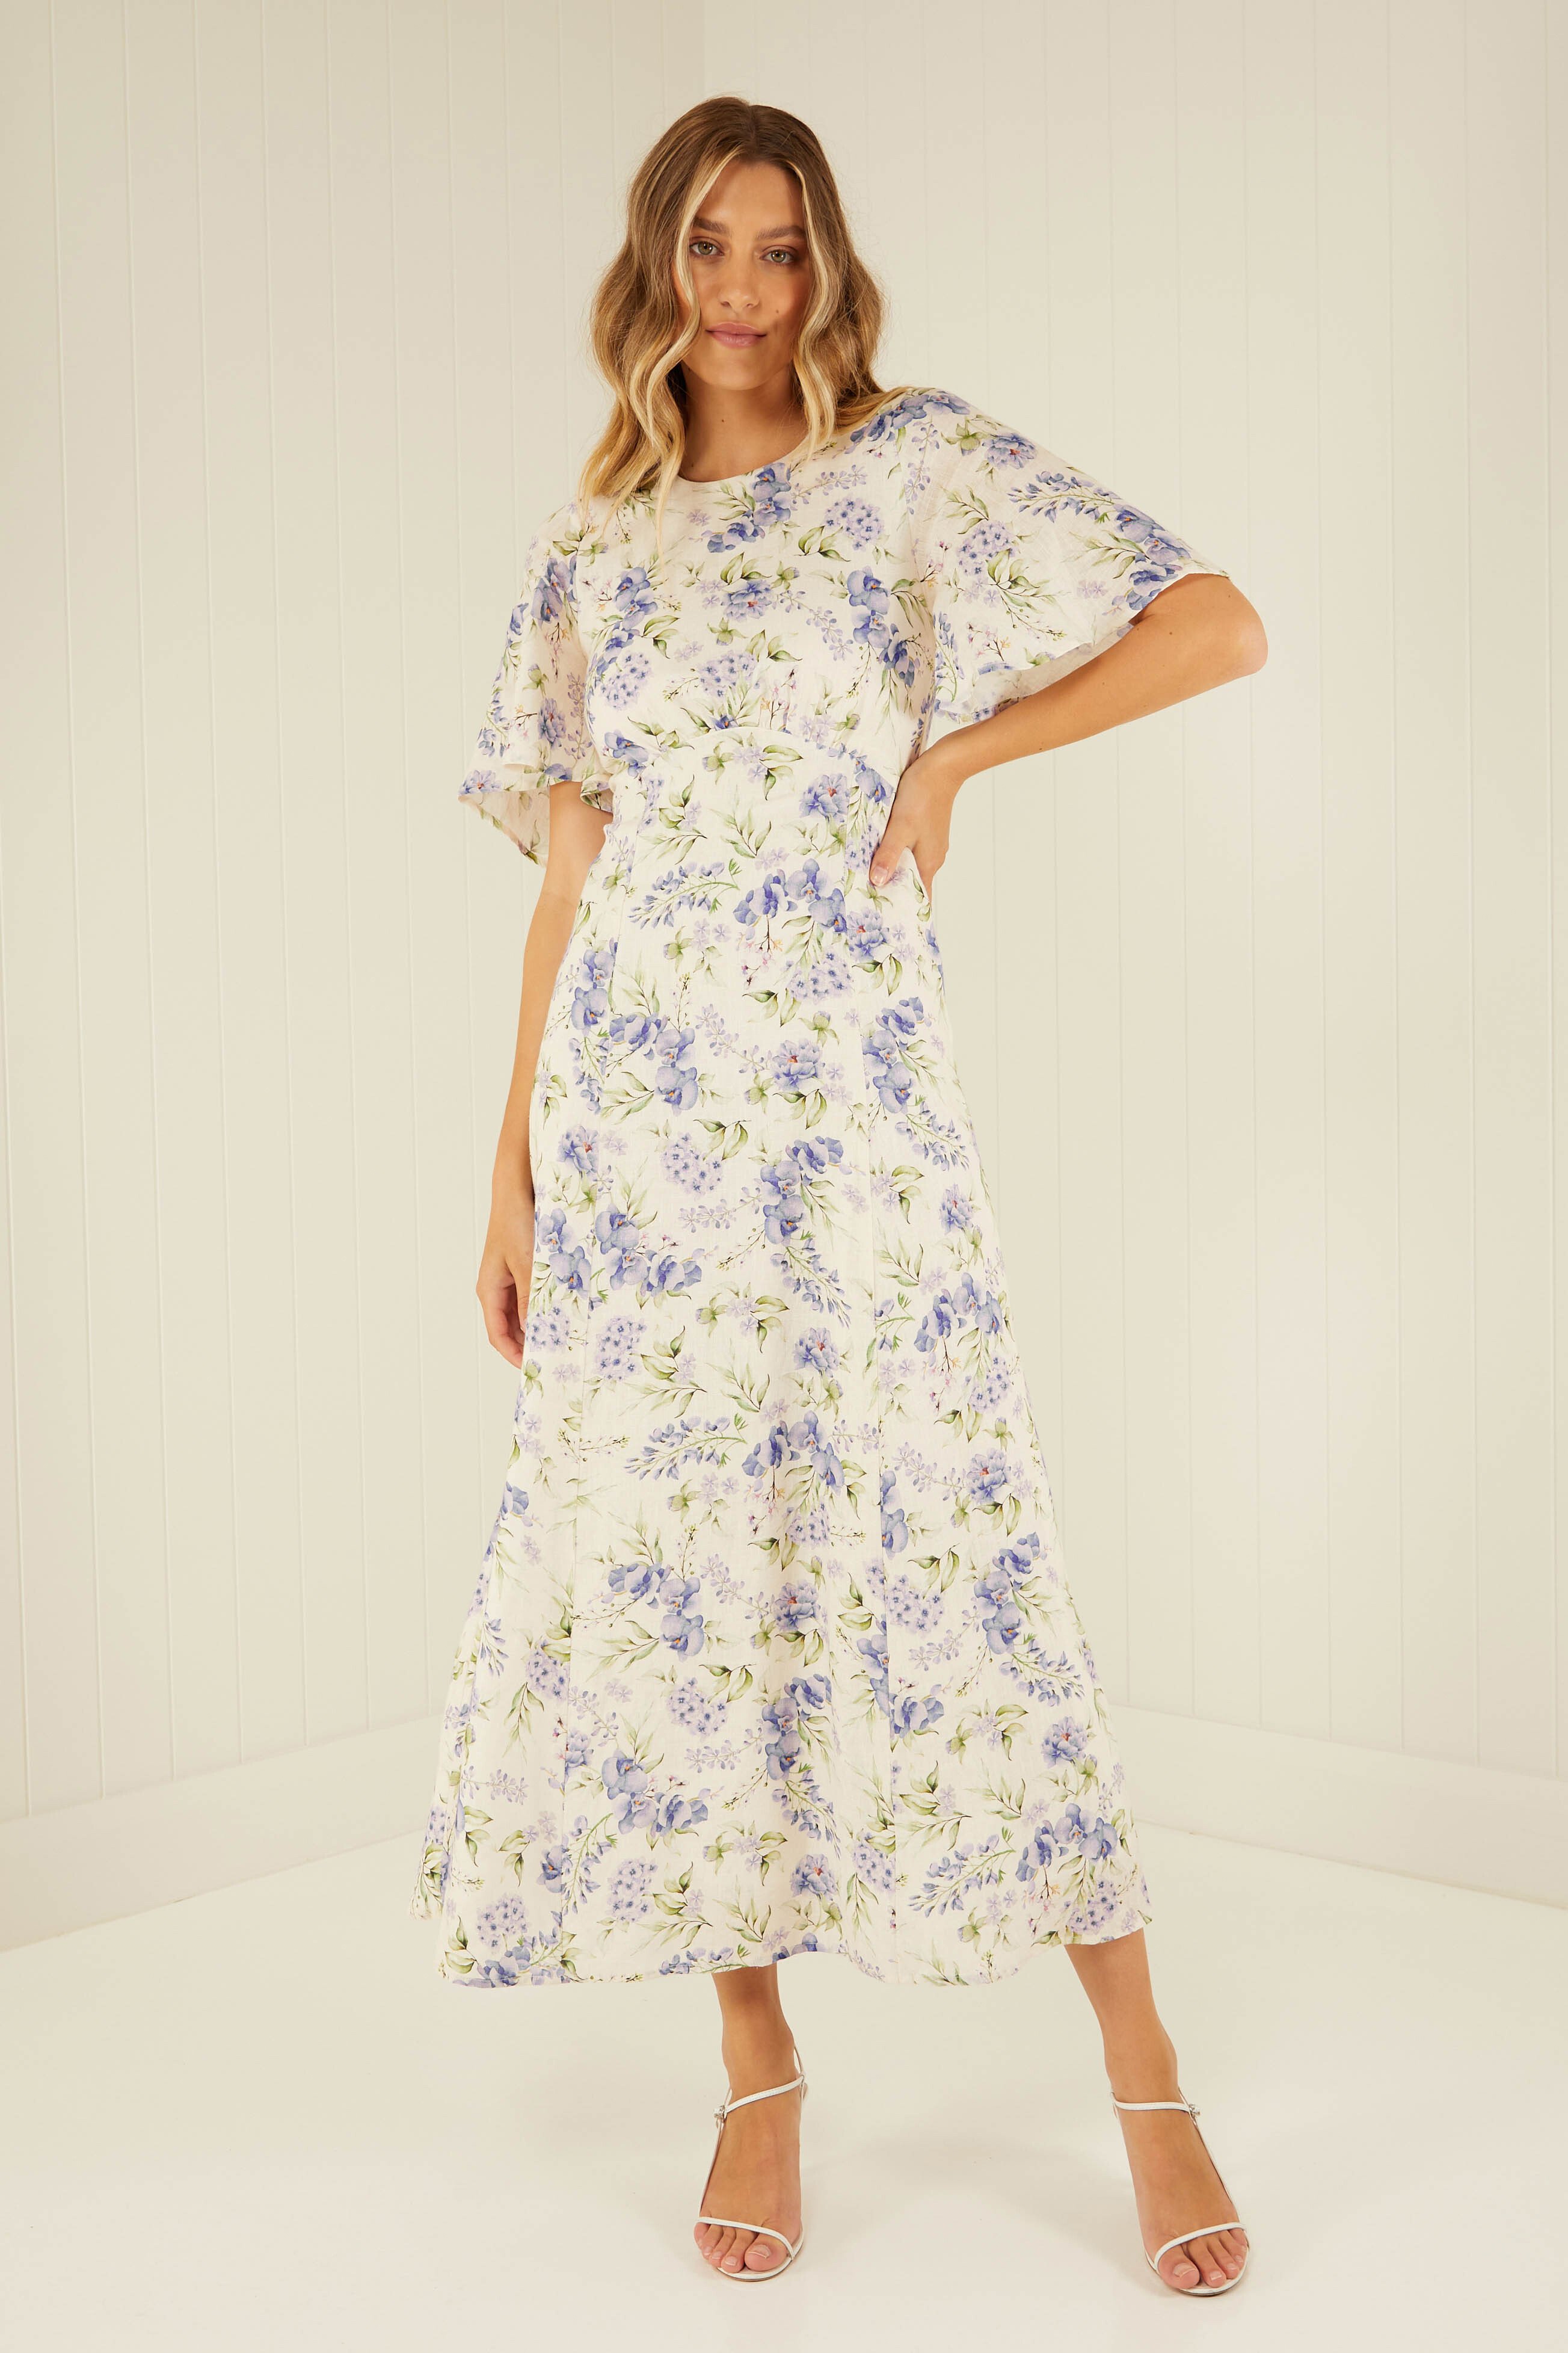 MOON AND BACK DRESS (PURPLE FLORAL)- PALM NOOSA SPRING 22 Boxing